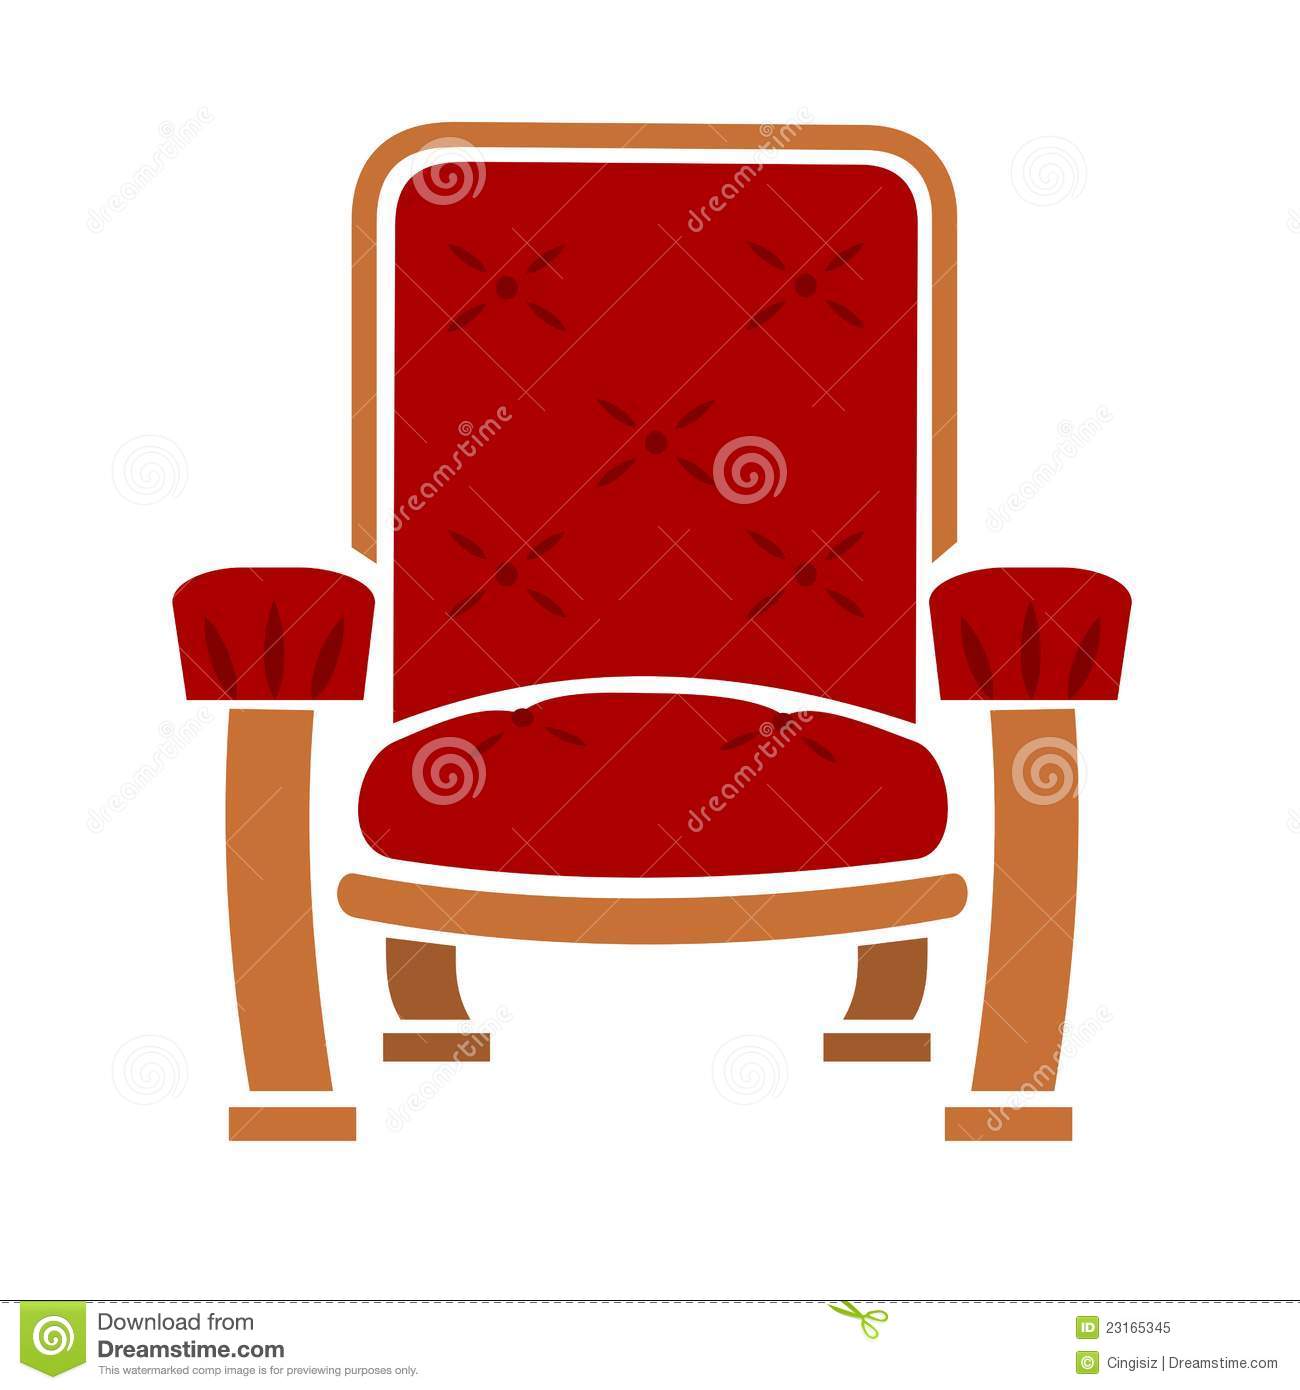 Comfy Chair Royalty Free Stock Photo   Image  23165345